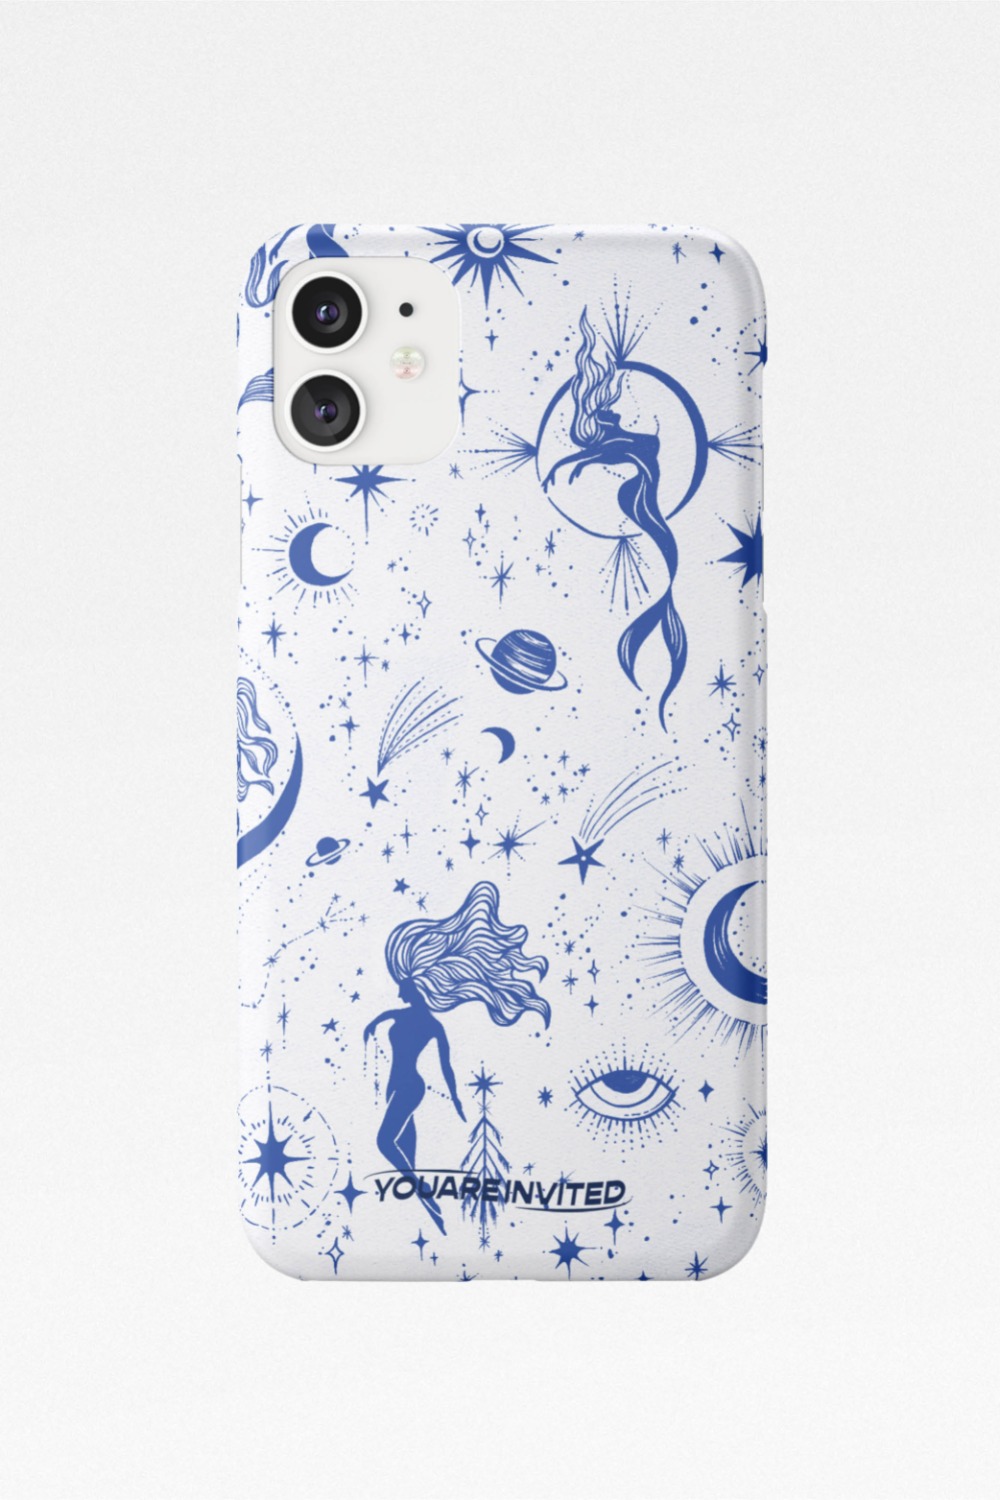 Fairies in the universe hard case (Blue White)